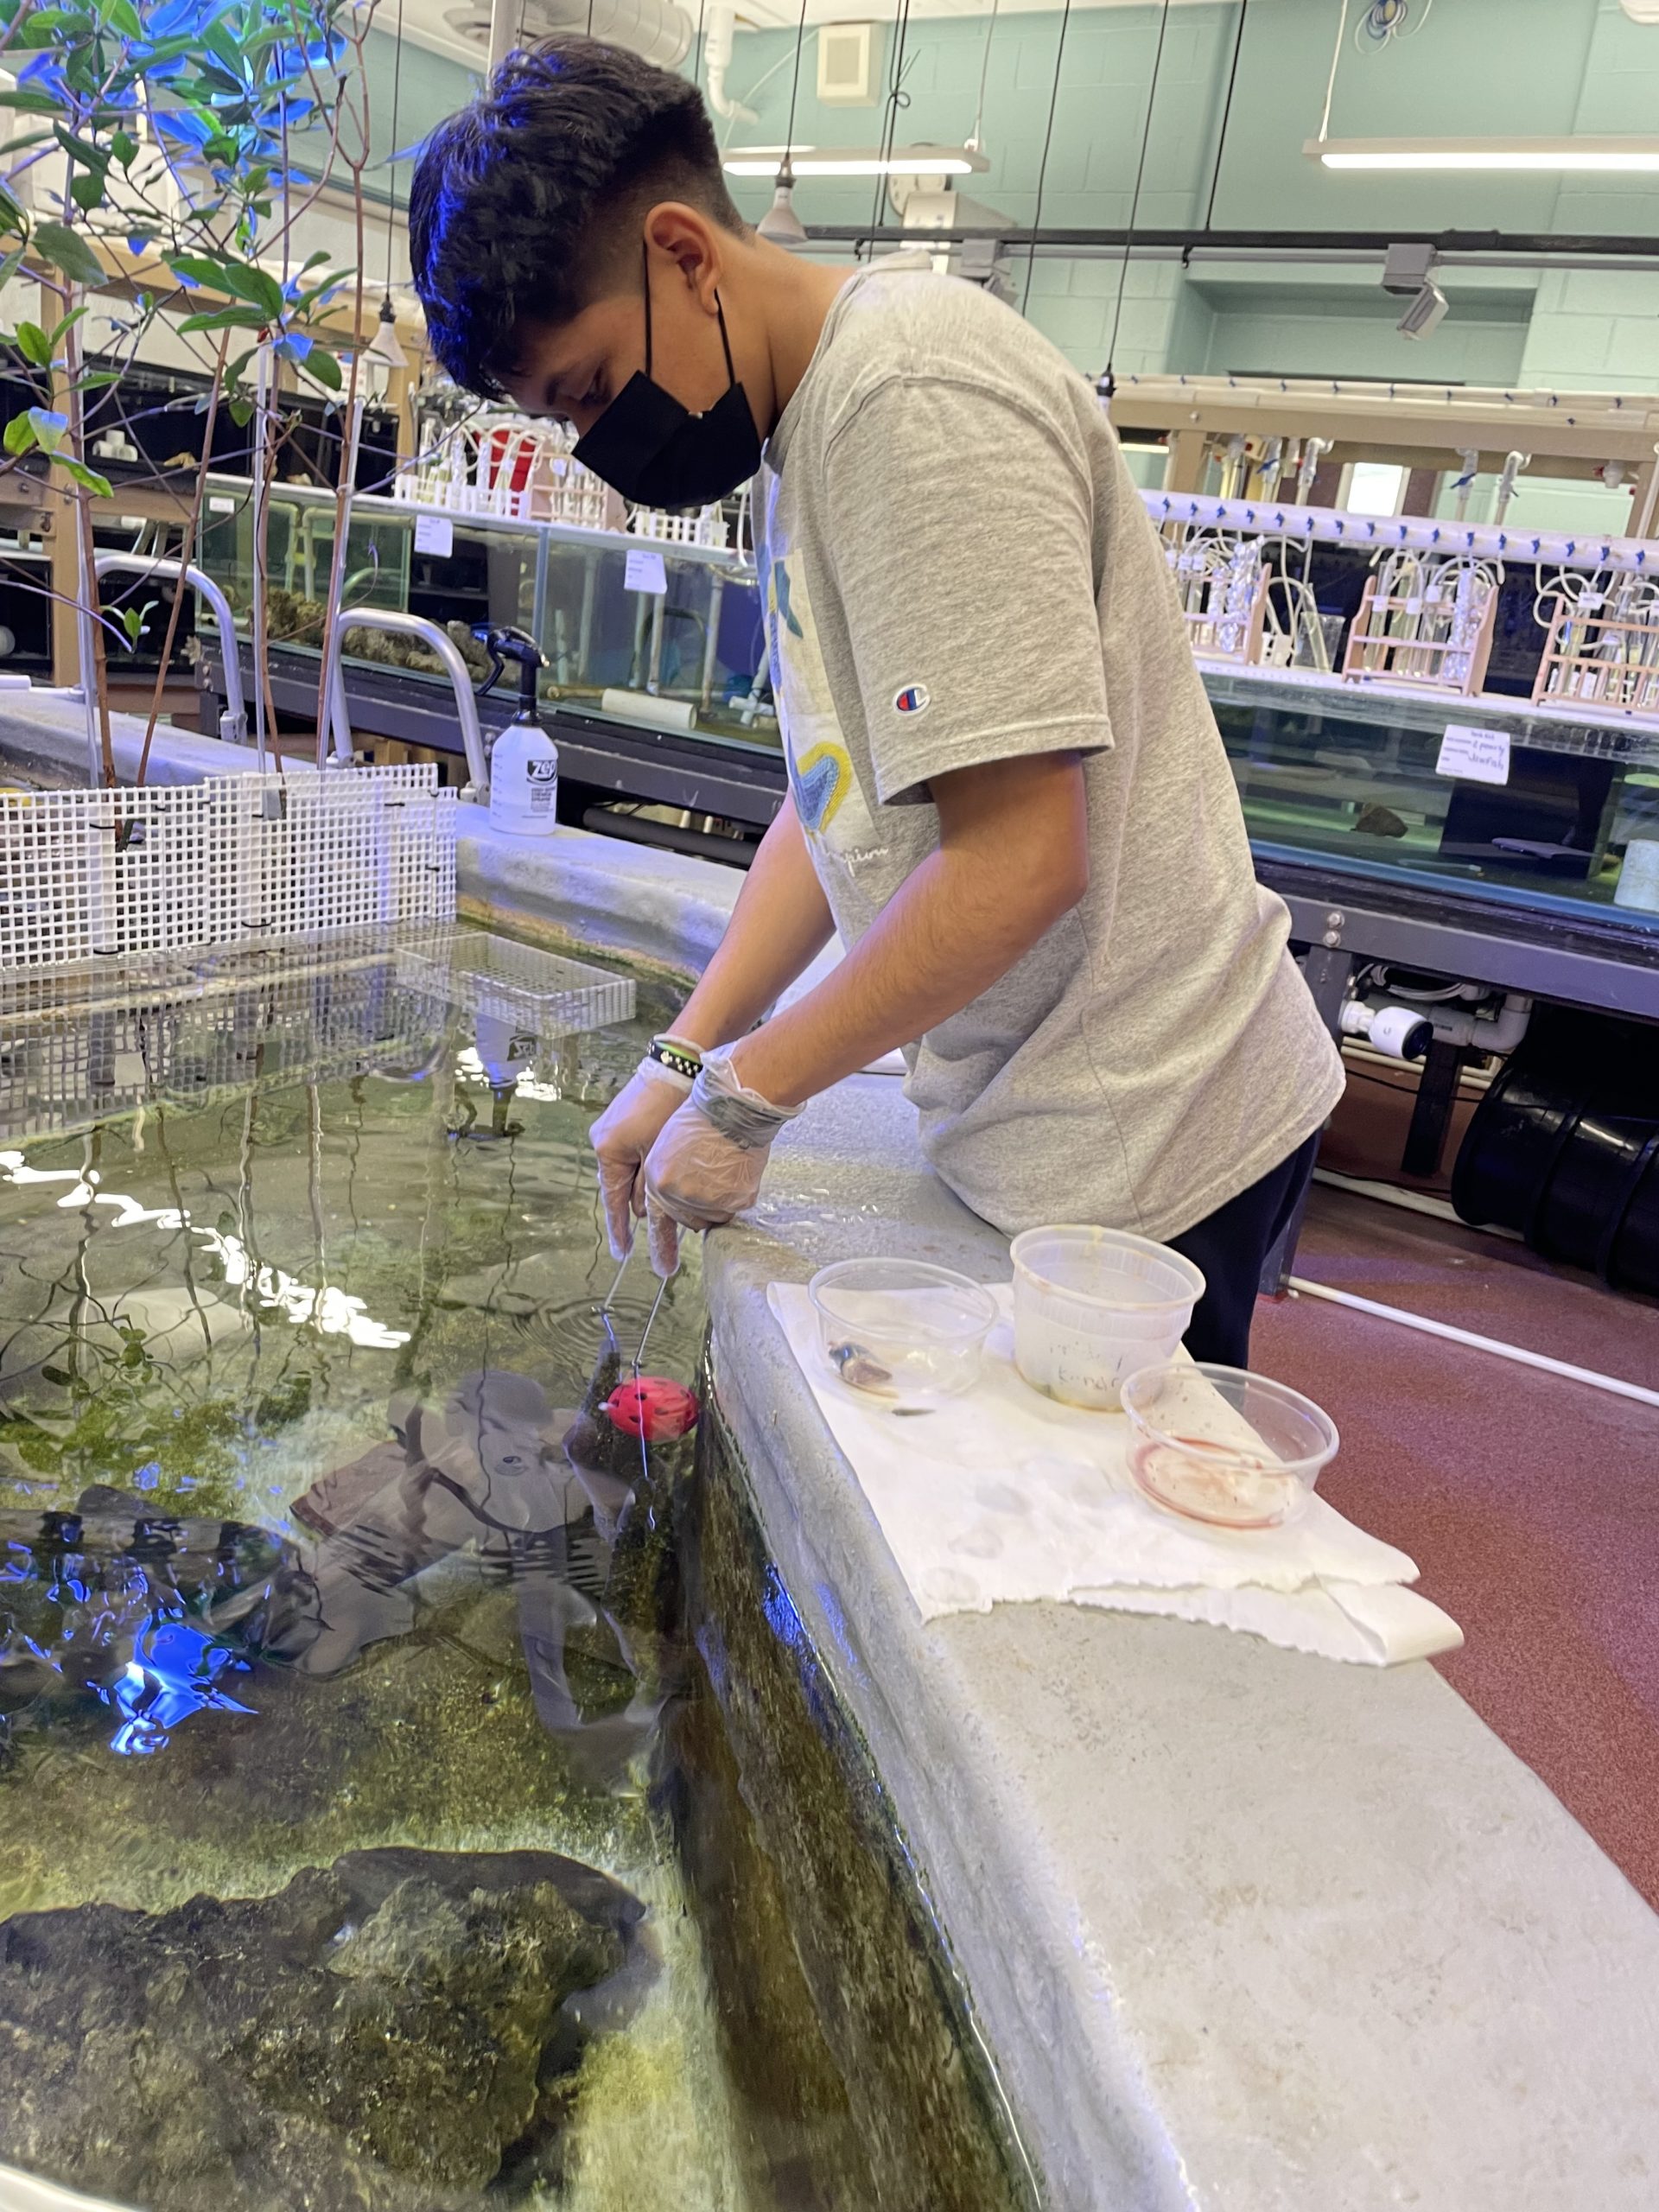 Southampton High School students are researching a wide variety of topics through a new marine science research program at the school.